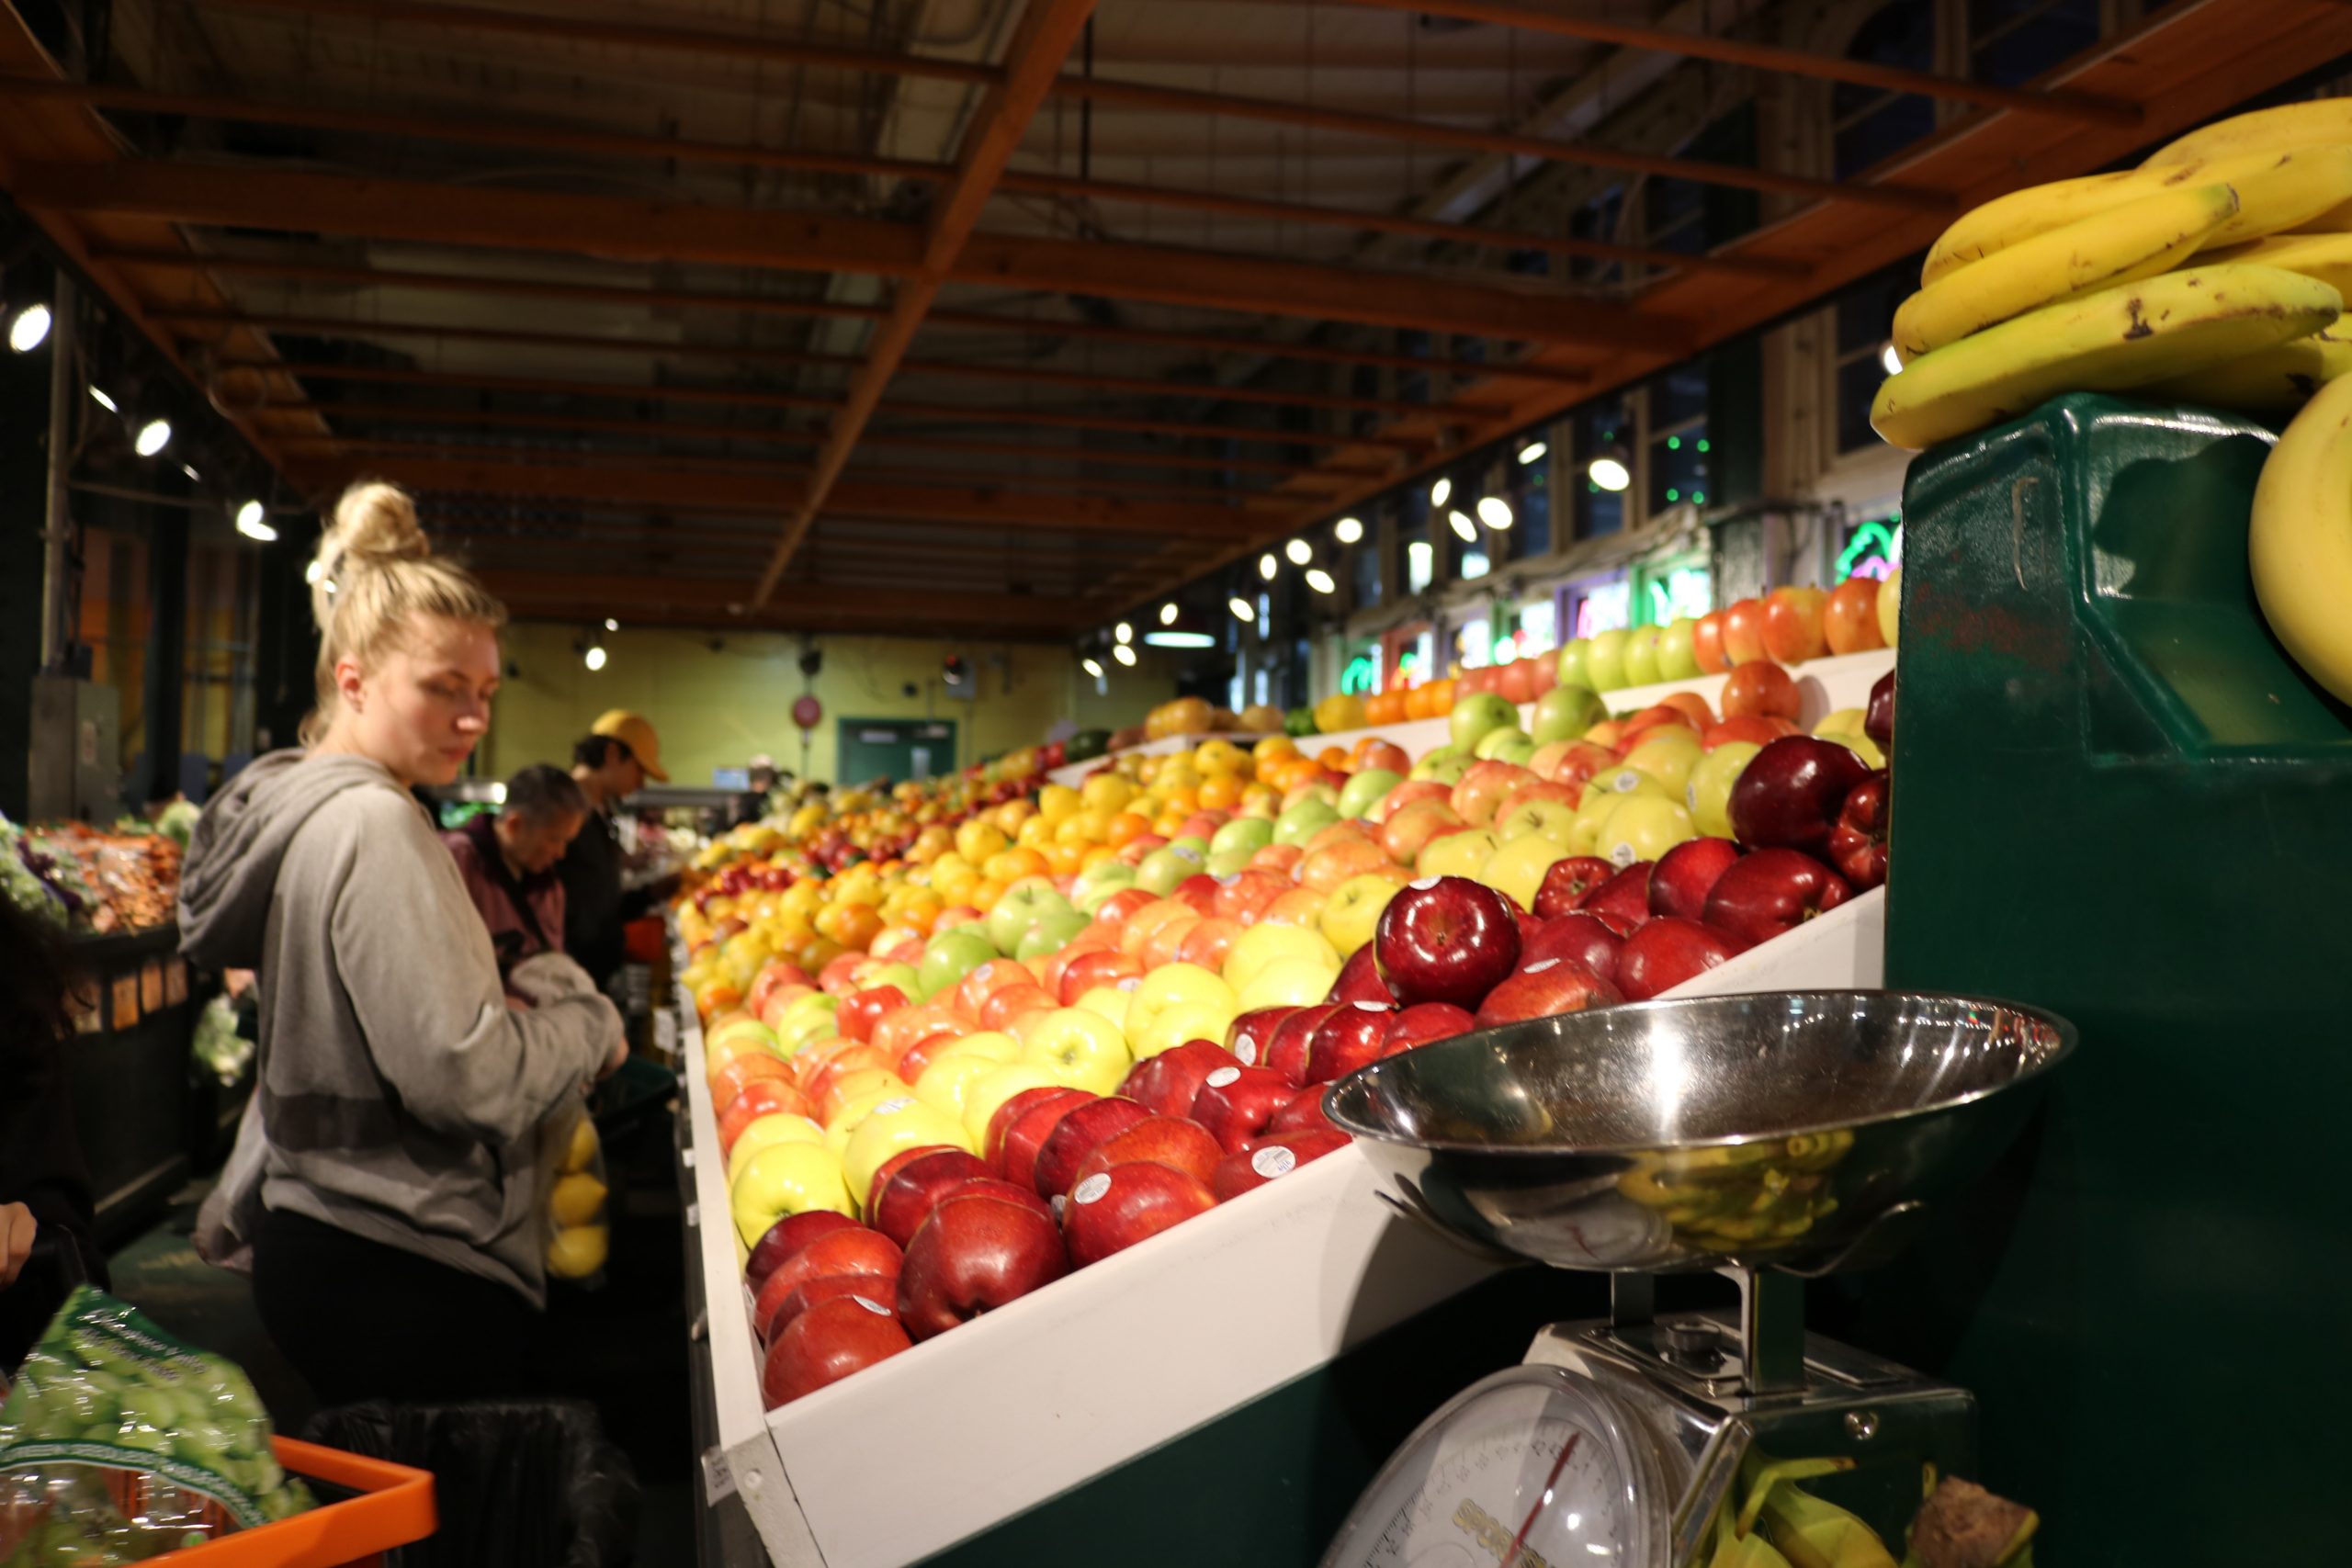 women shopping in produce section